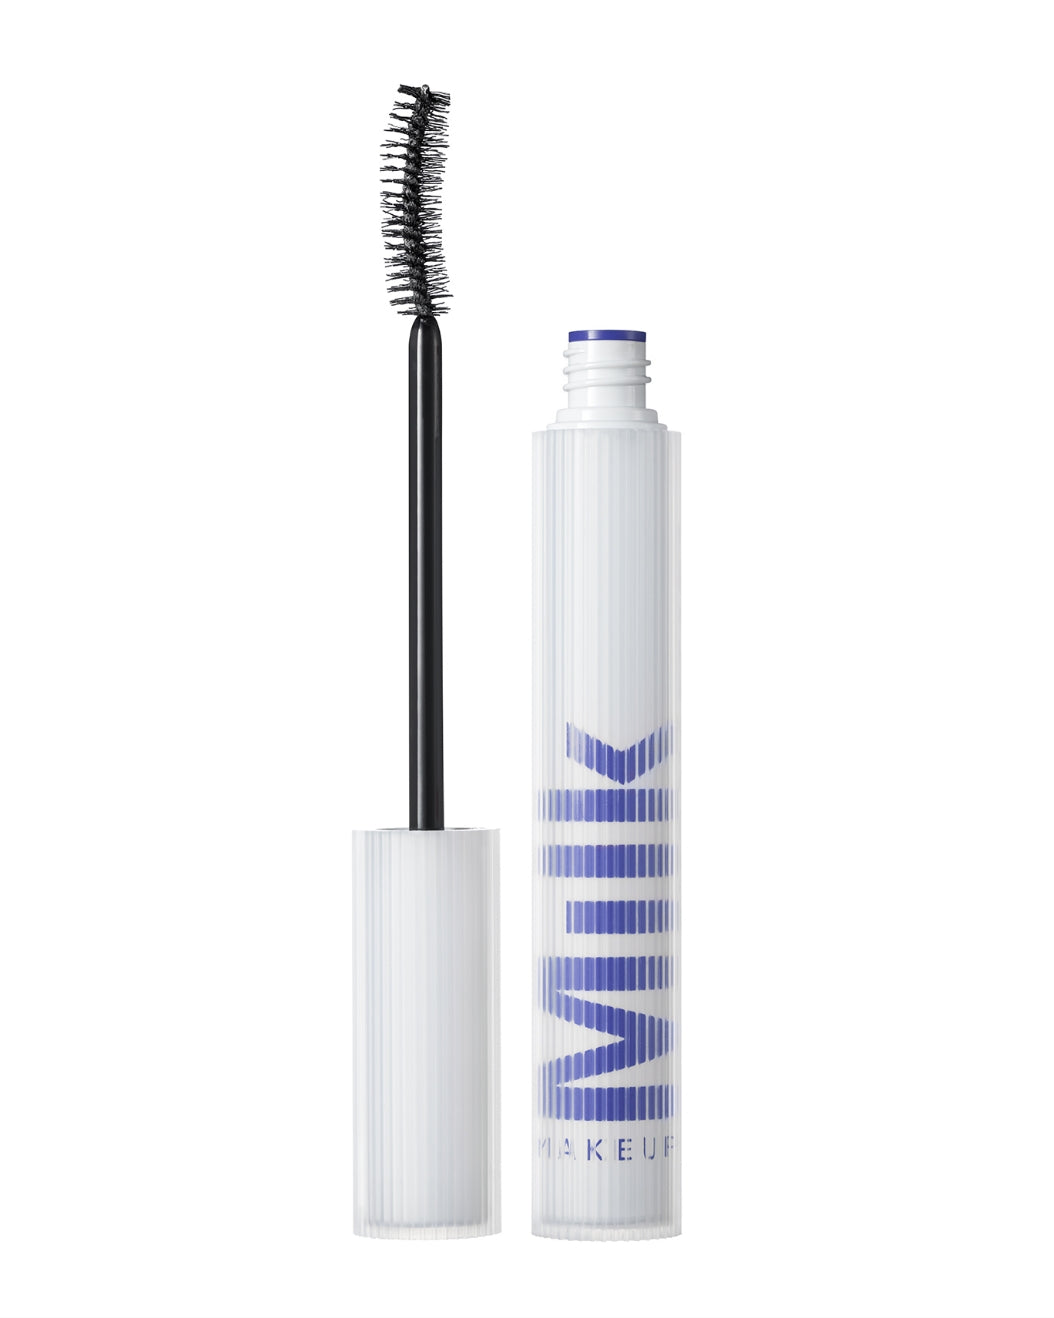 Unscrewed tube of Milk Makeup RISE Waterproof Mascara with the wand next to it on a white background